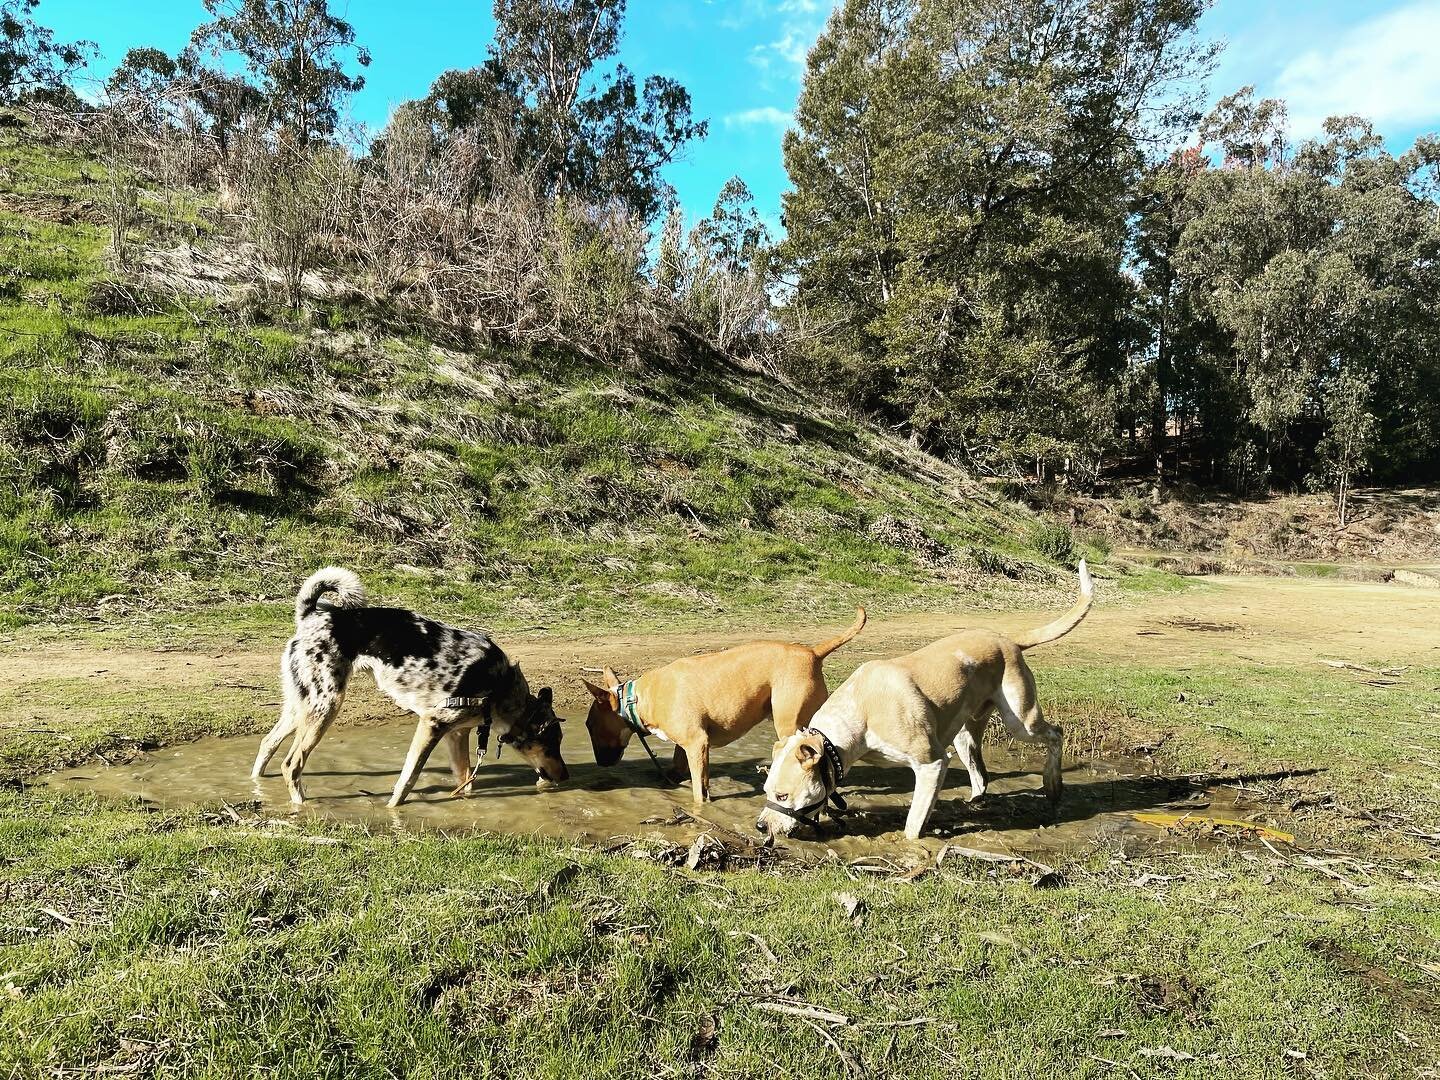 A meeting at the local watering hole #dirtydog #dirtydoghikes #ebrp #ebrpd #dogwalking #dogwalkers #offleash #doghikes #doghiking #oaklanddog #oaklanddogs #oaklanddogwalking
#oaklanddogwalker #puppro #doggo #doggos #puppy #pup #pupper #puppo #dogsofo